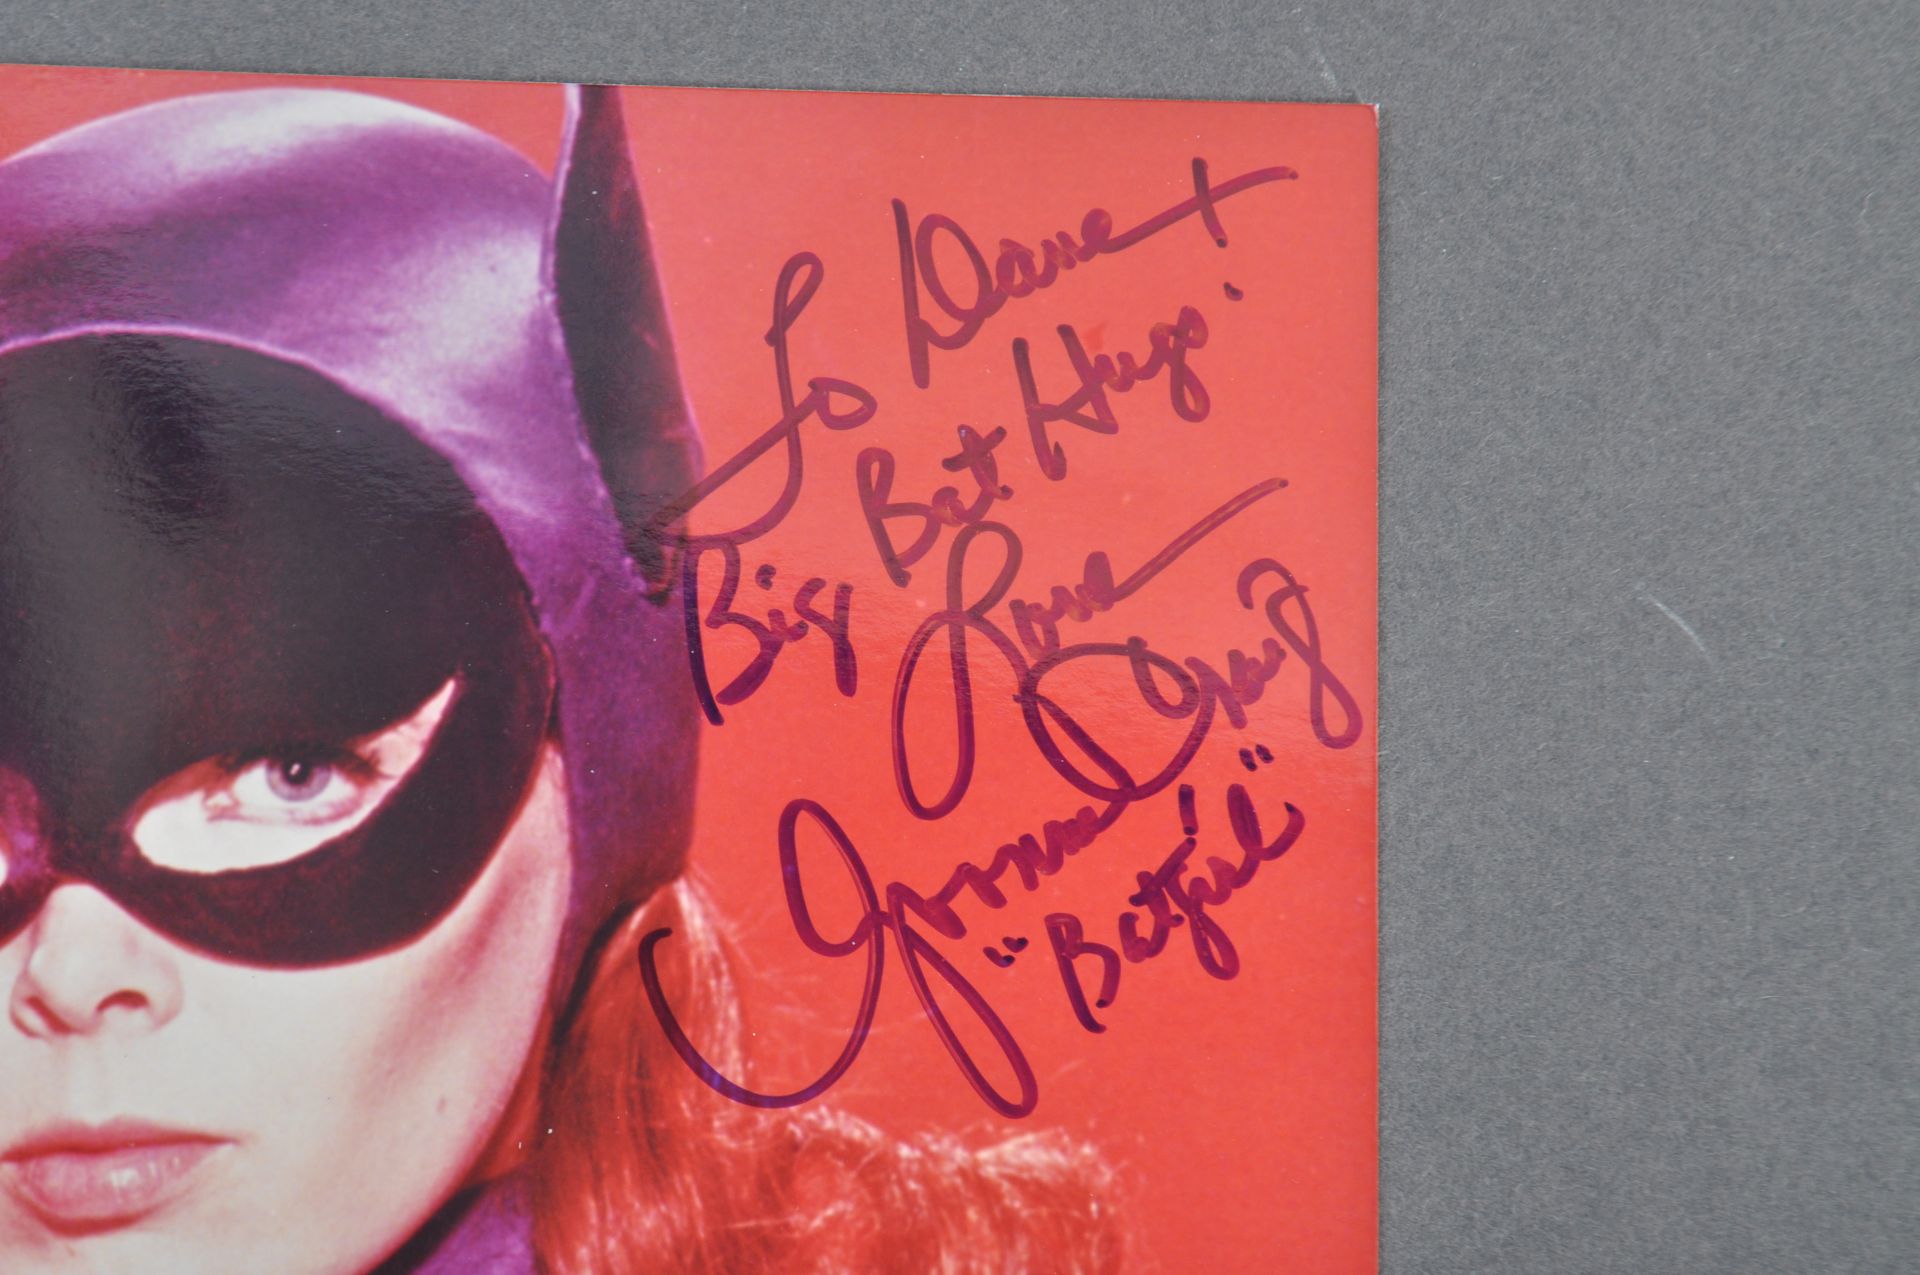 ESTATE OF DAVE PROWSE - BATMAN - YVONNE CRAIG SIGNED PHOTOGRAPH - Image 2 of 2